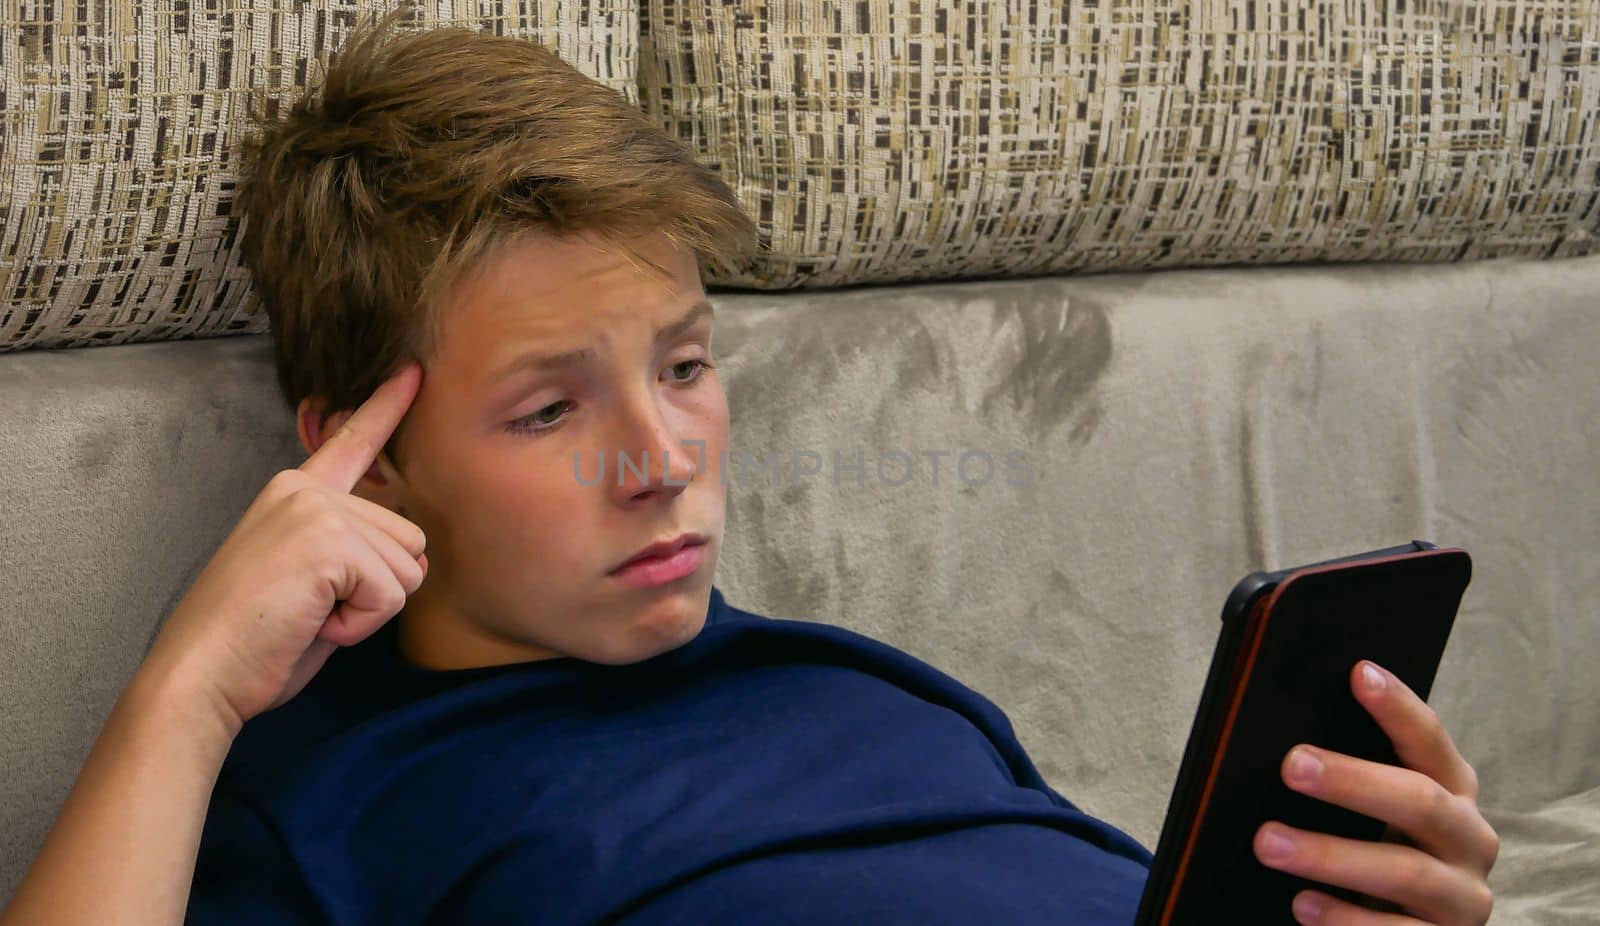 Dissatisfied and surprised boy reads an electronic device. by gelog67